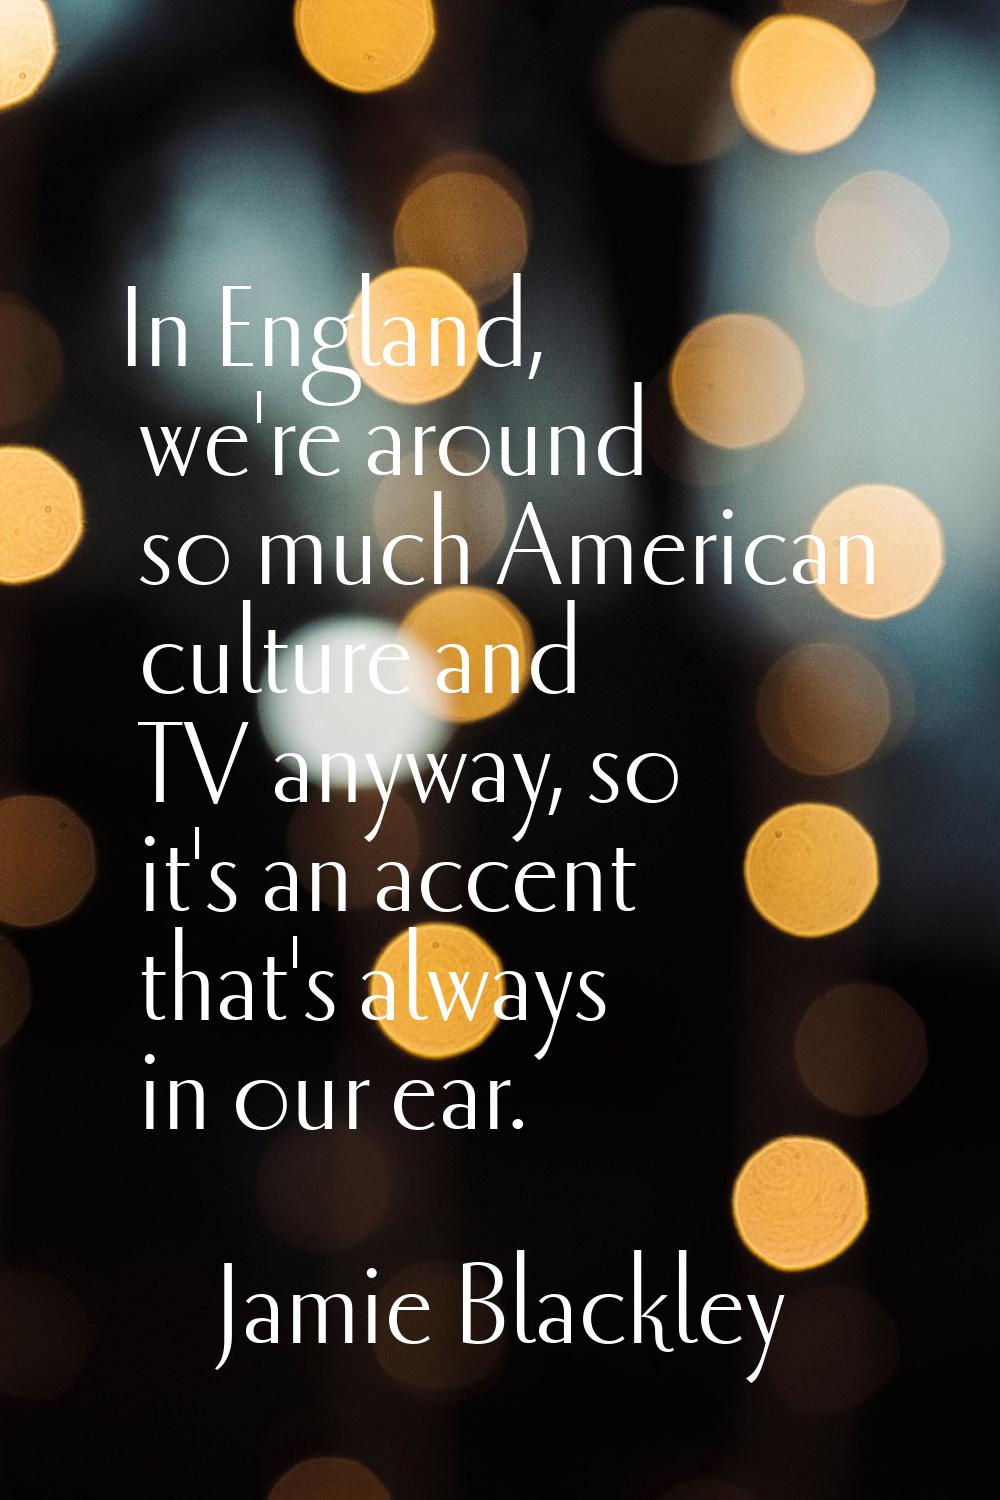 In England, we're around so much American culture and TV anyway, so it's an accent that's always in